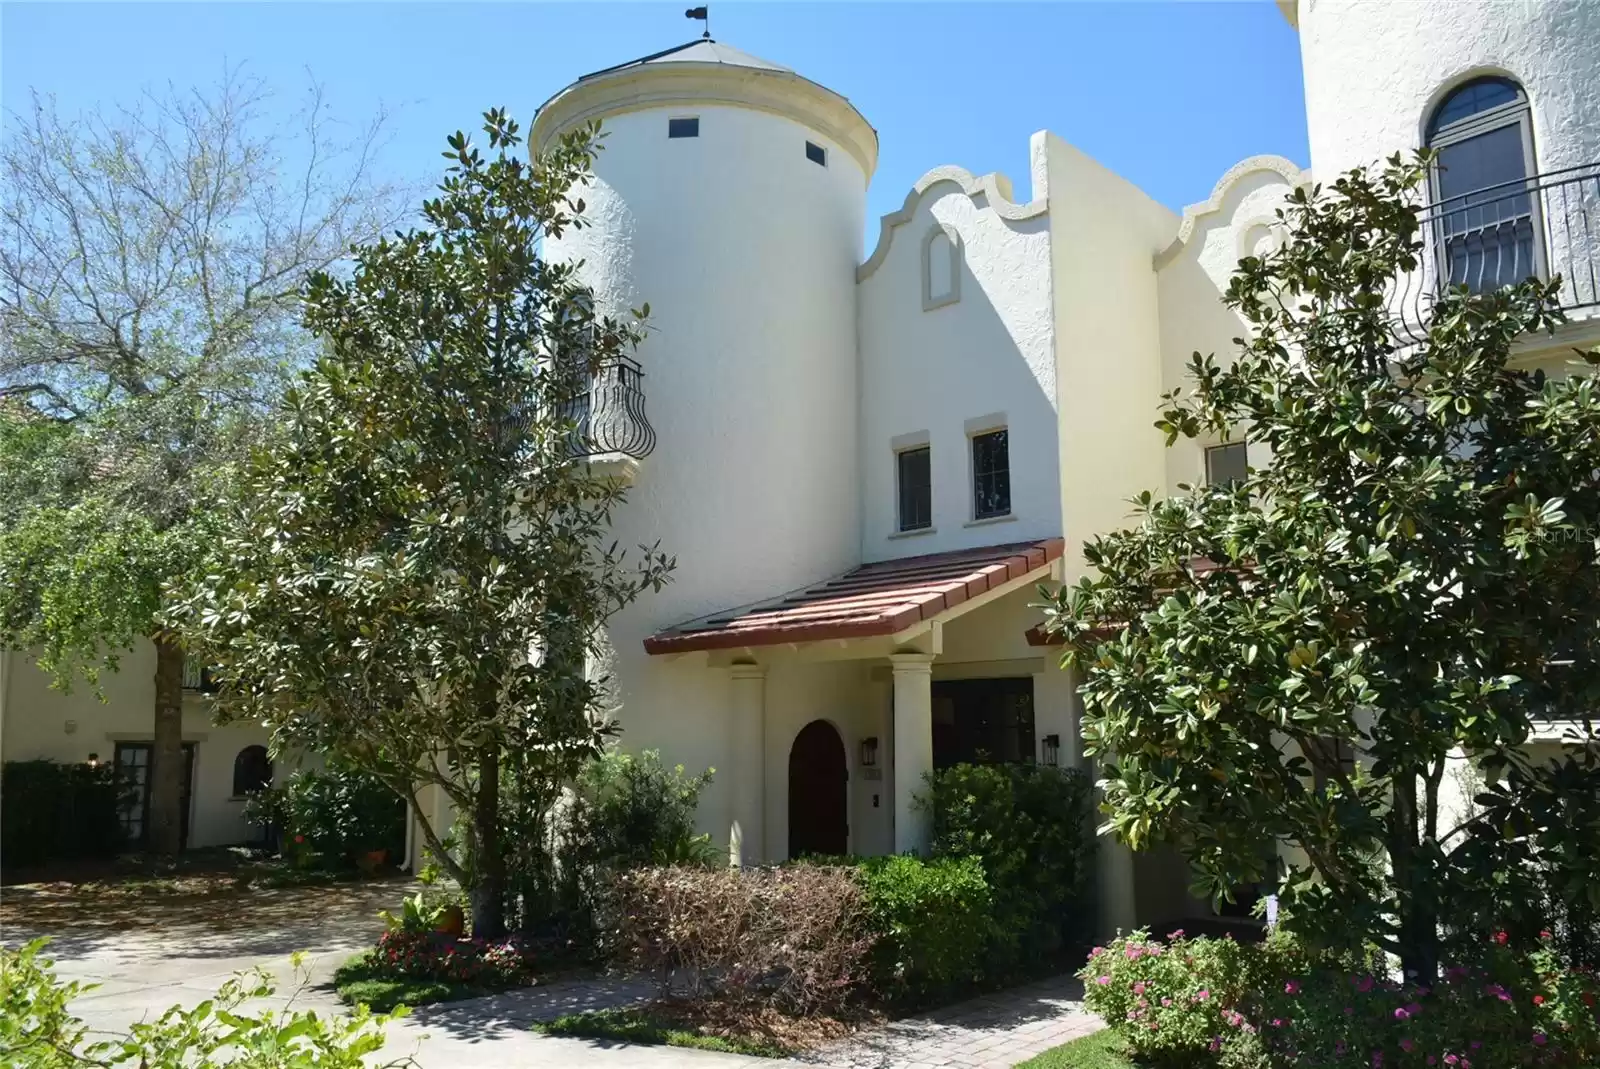 An architectural gem with exterior features including Spanish stucco finishes, turrets, balconies and arched doorways